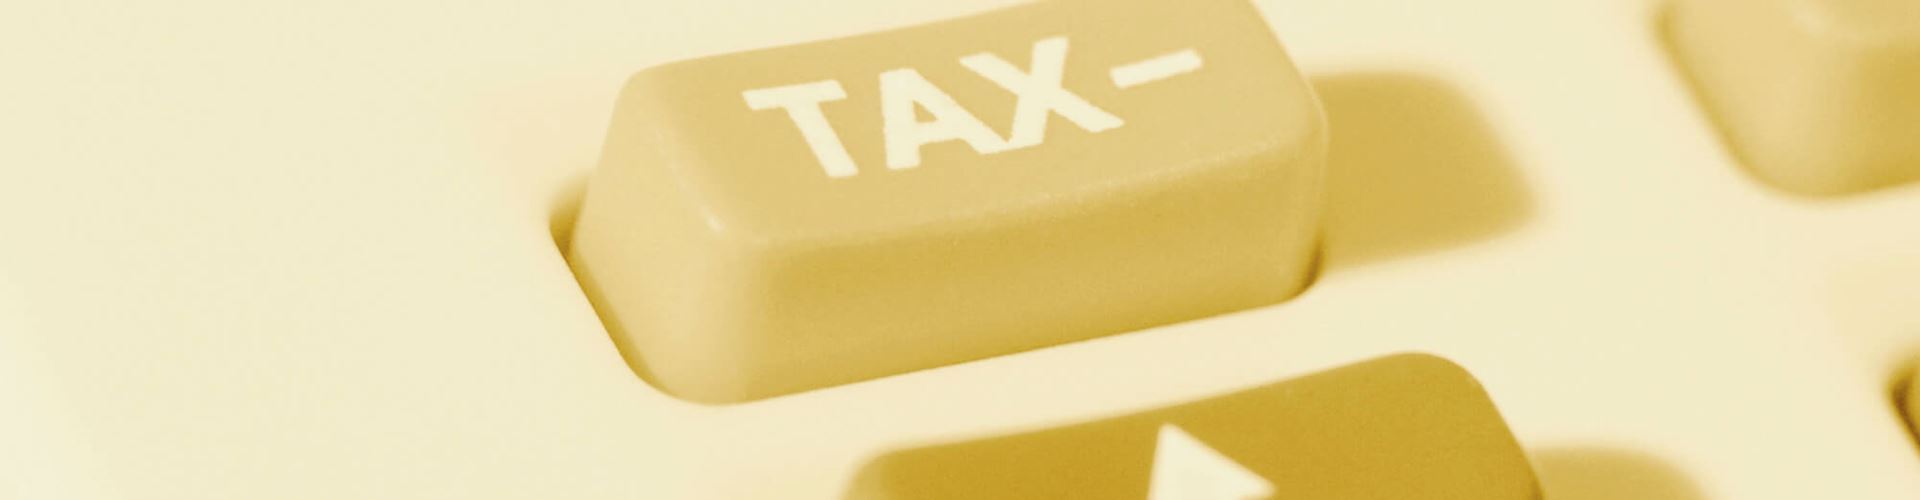 R&D tax relief for SMEs goes live